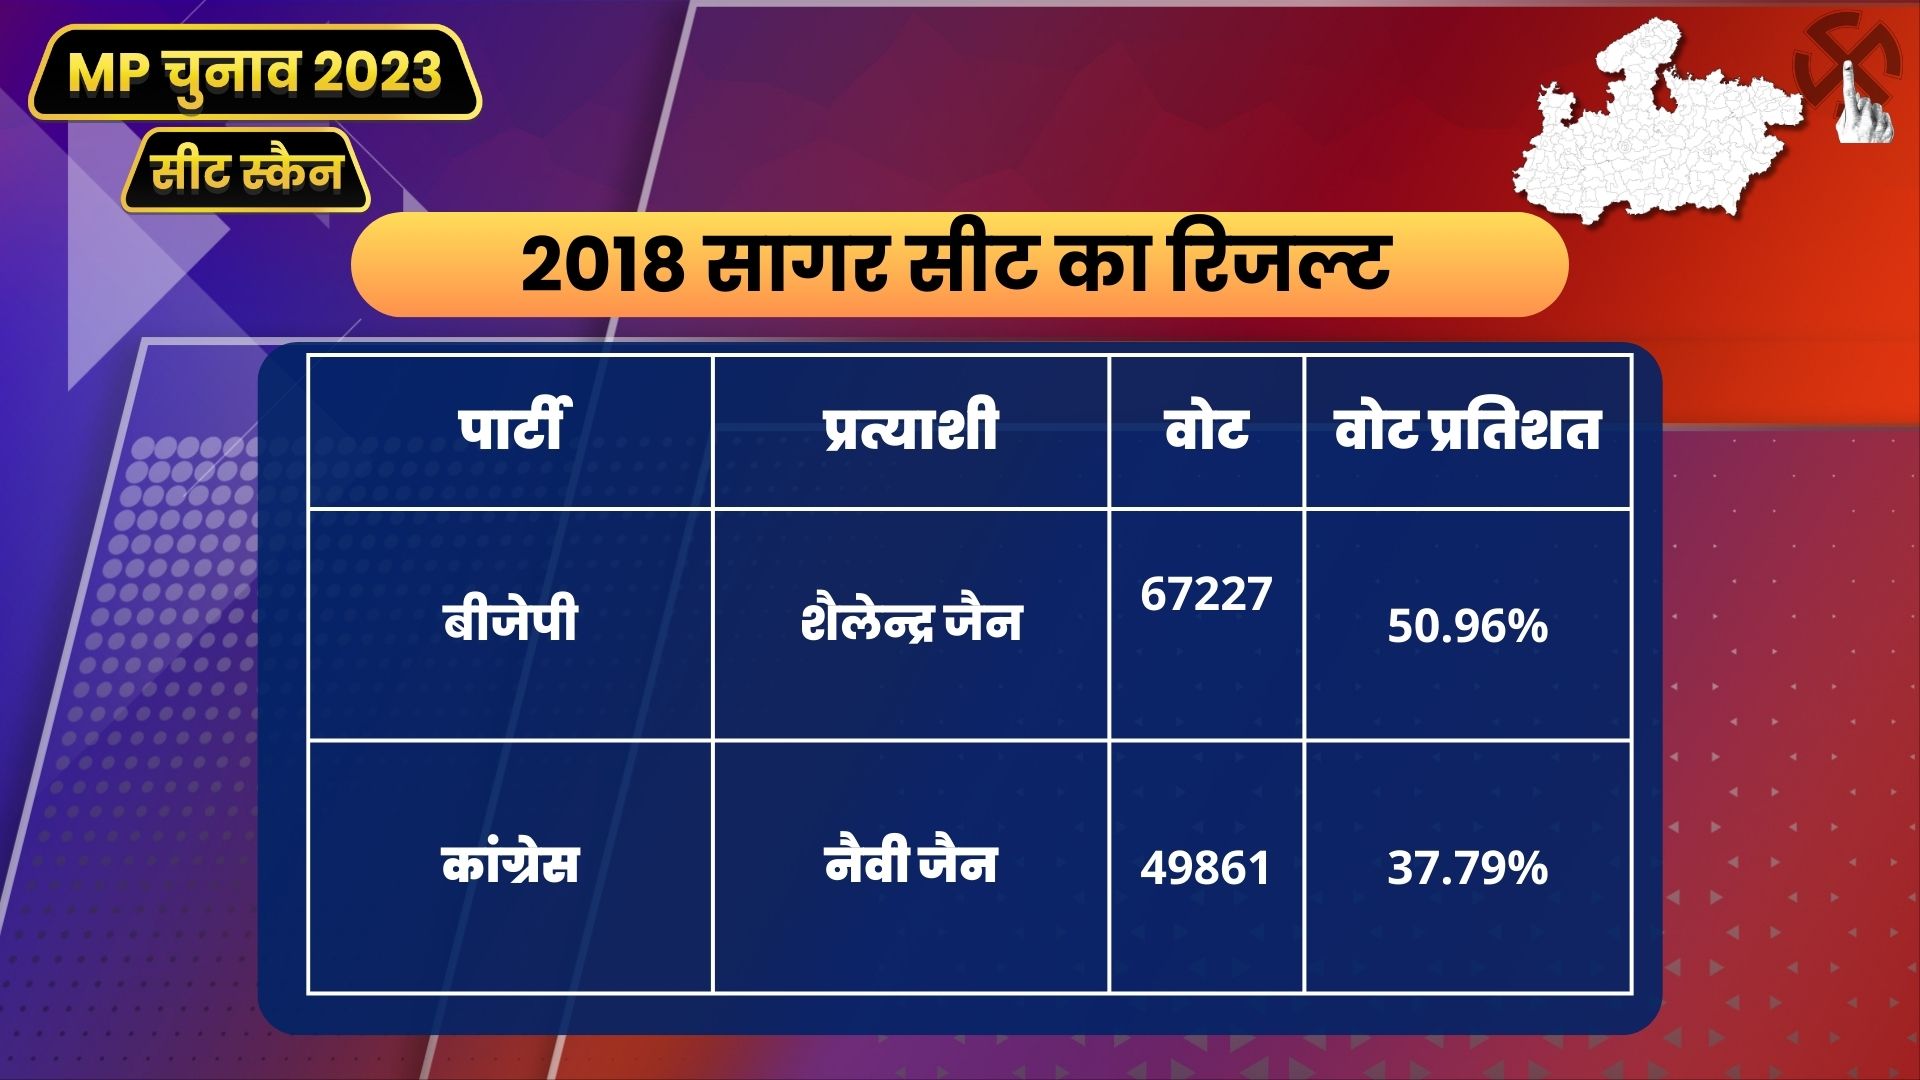 Year 2018 Result